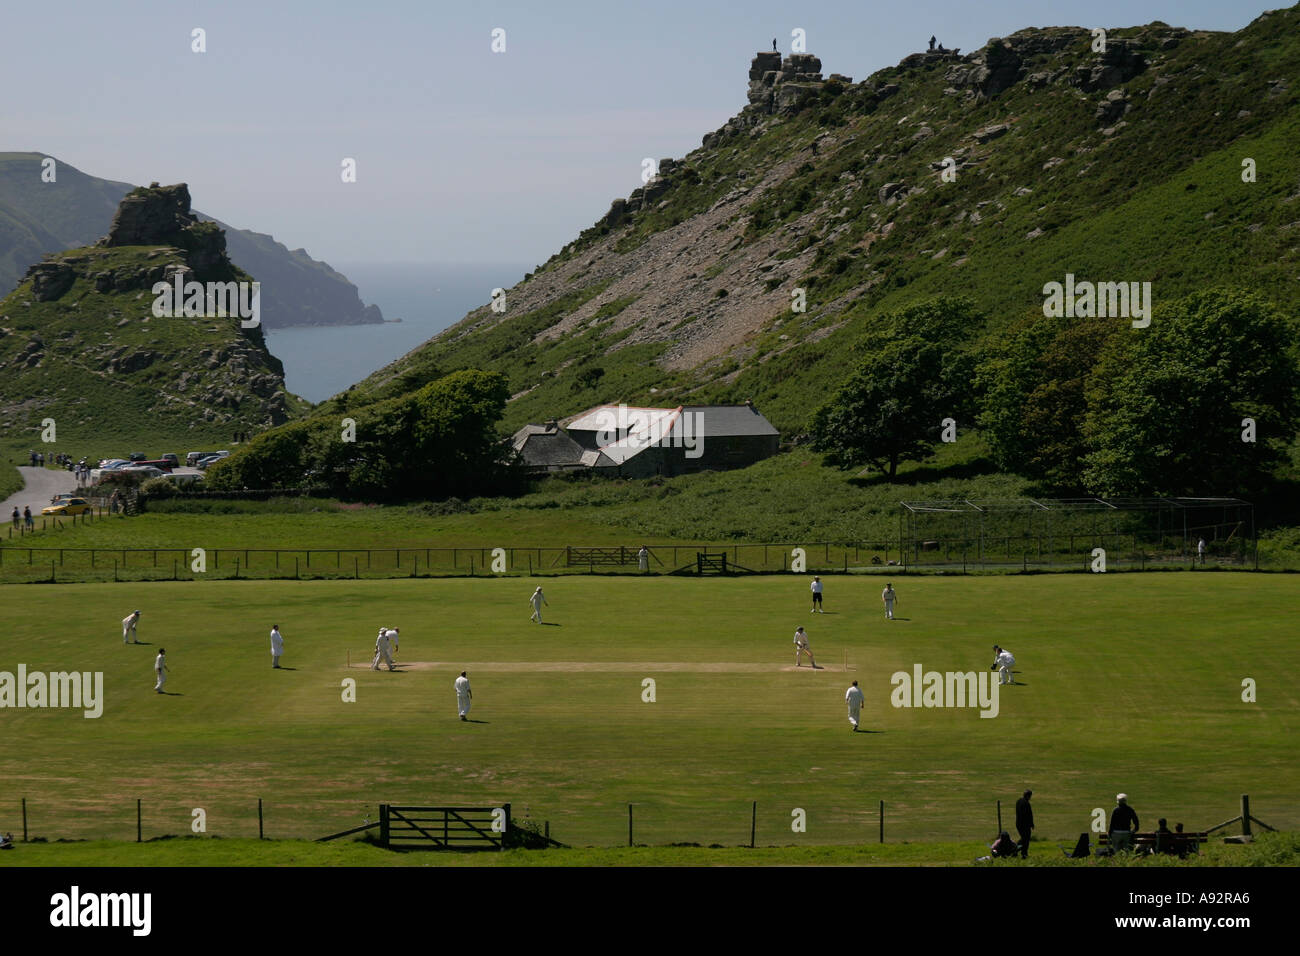 Lynmouth Lynton Men playing game of cricket match pitch Valley of the Rocks scenic games pitch aerial view Stock Photo